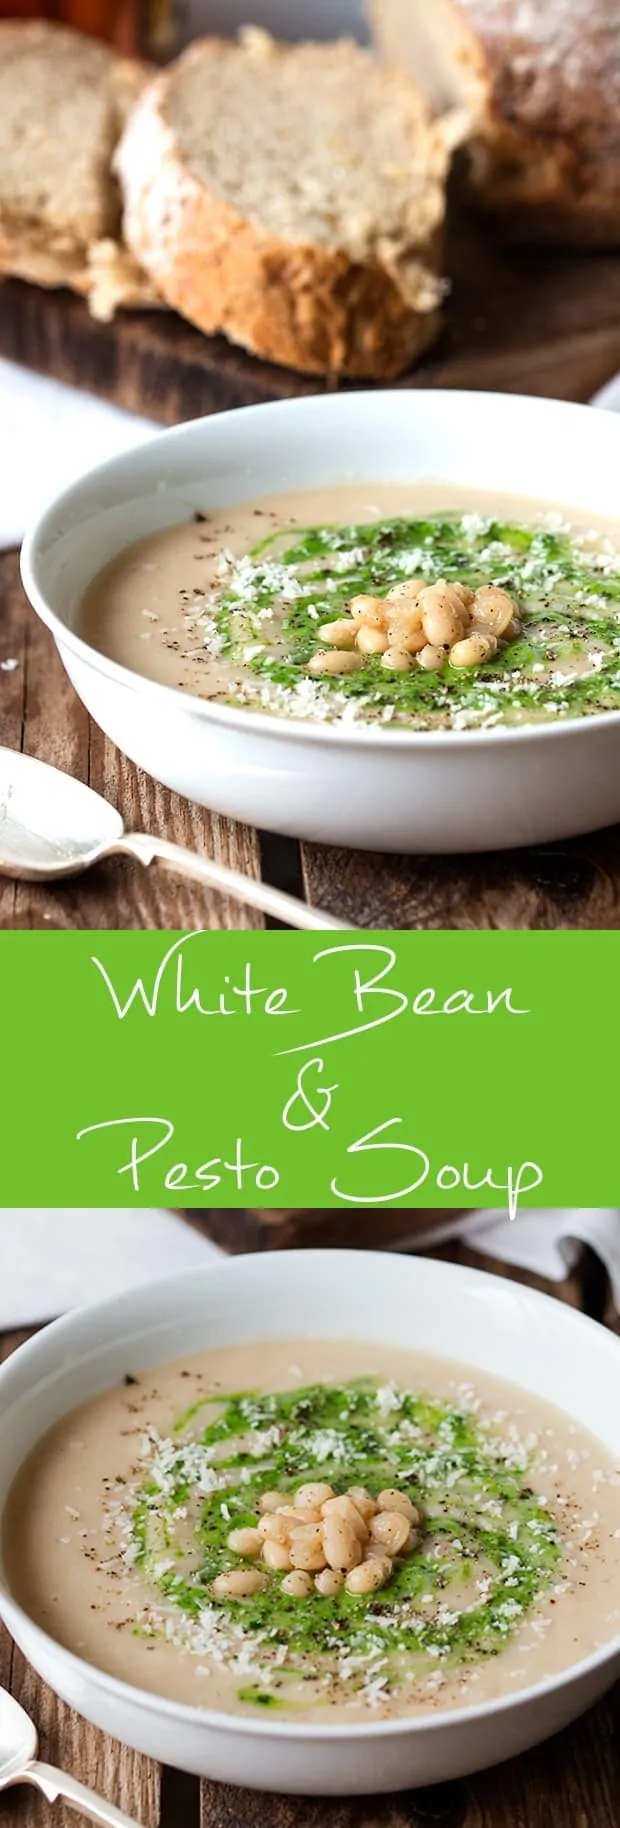 A warming, creamy, white bean soup, swirled with pesto and parmesan.